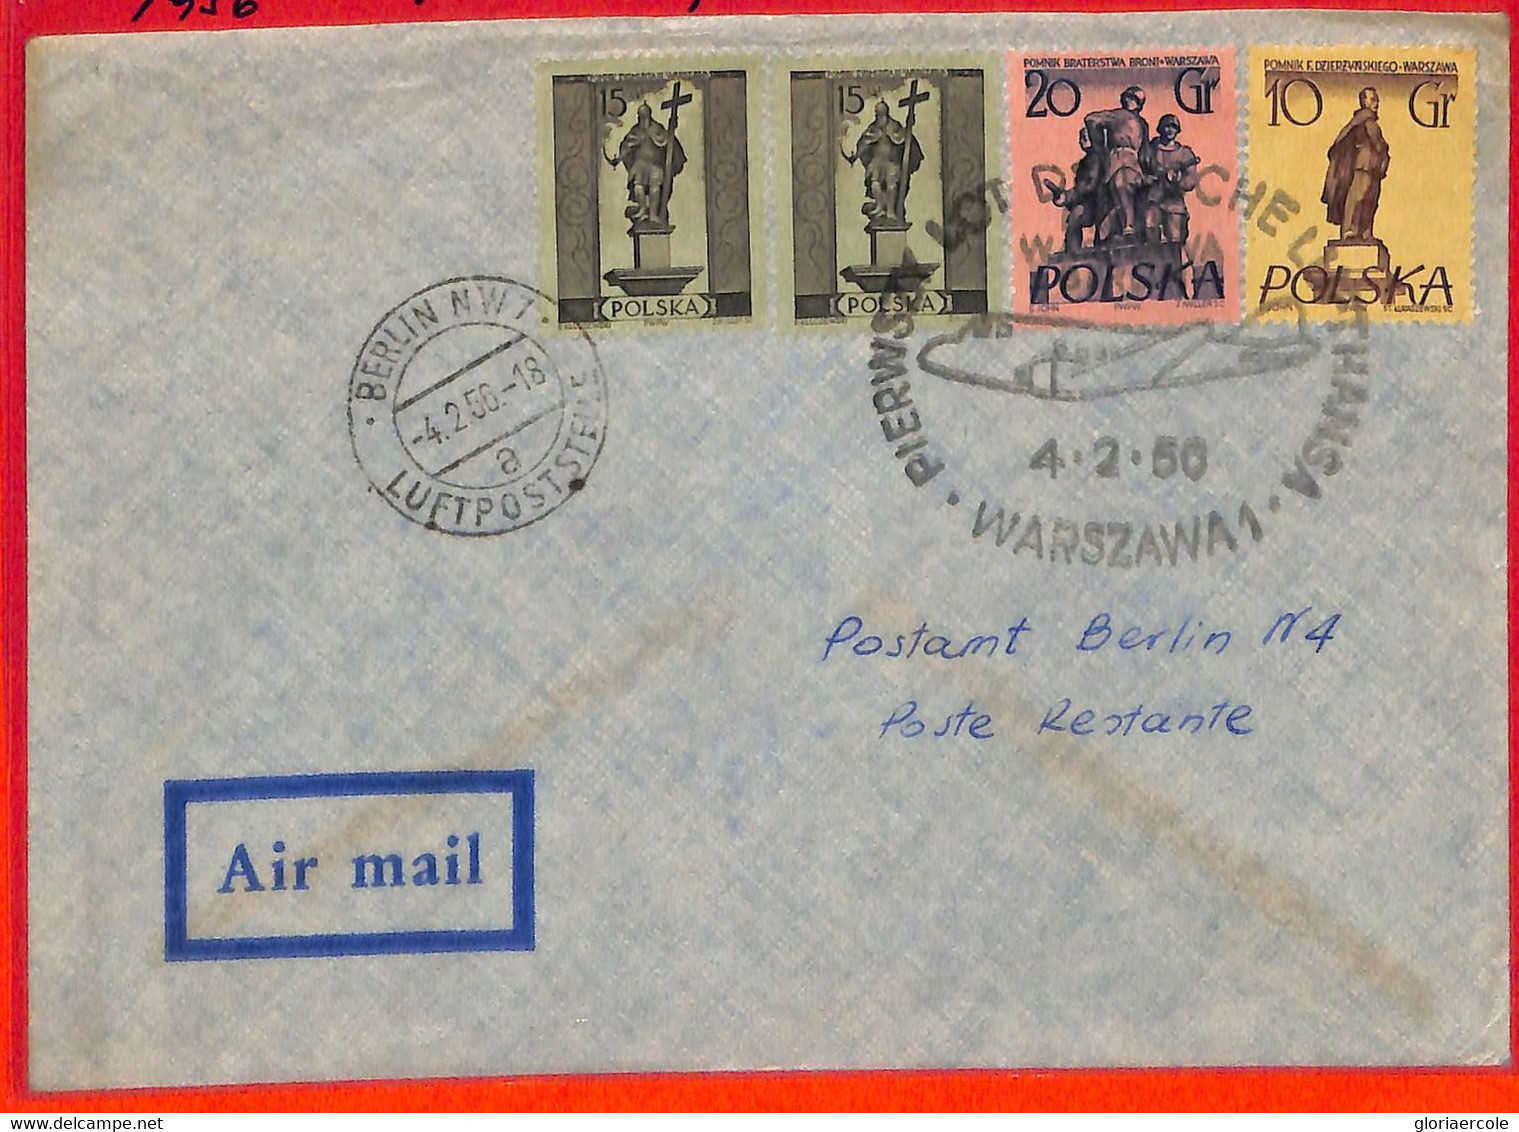 Aa3410 - POLONIA - Postal History - FIRST FLIGHT Cover WARSAW - BERLIN  1956 - Flugzeuge